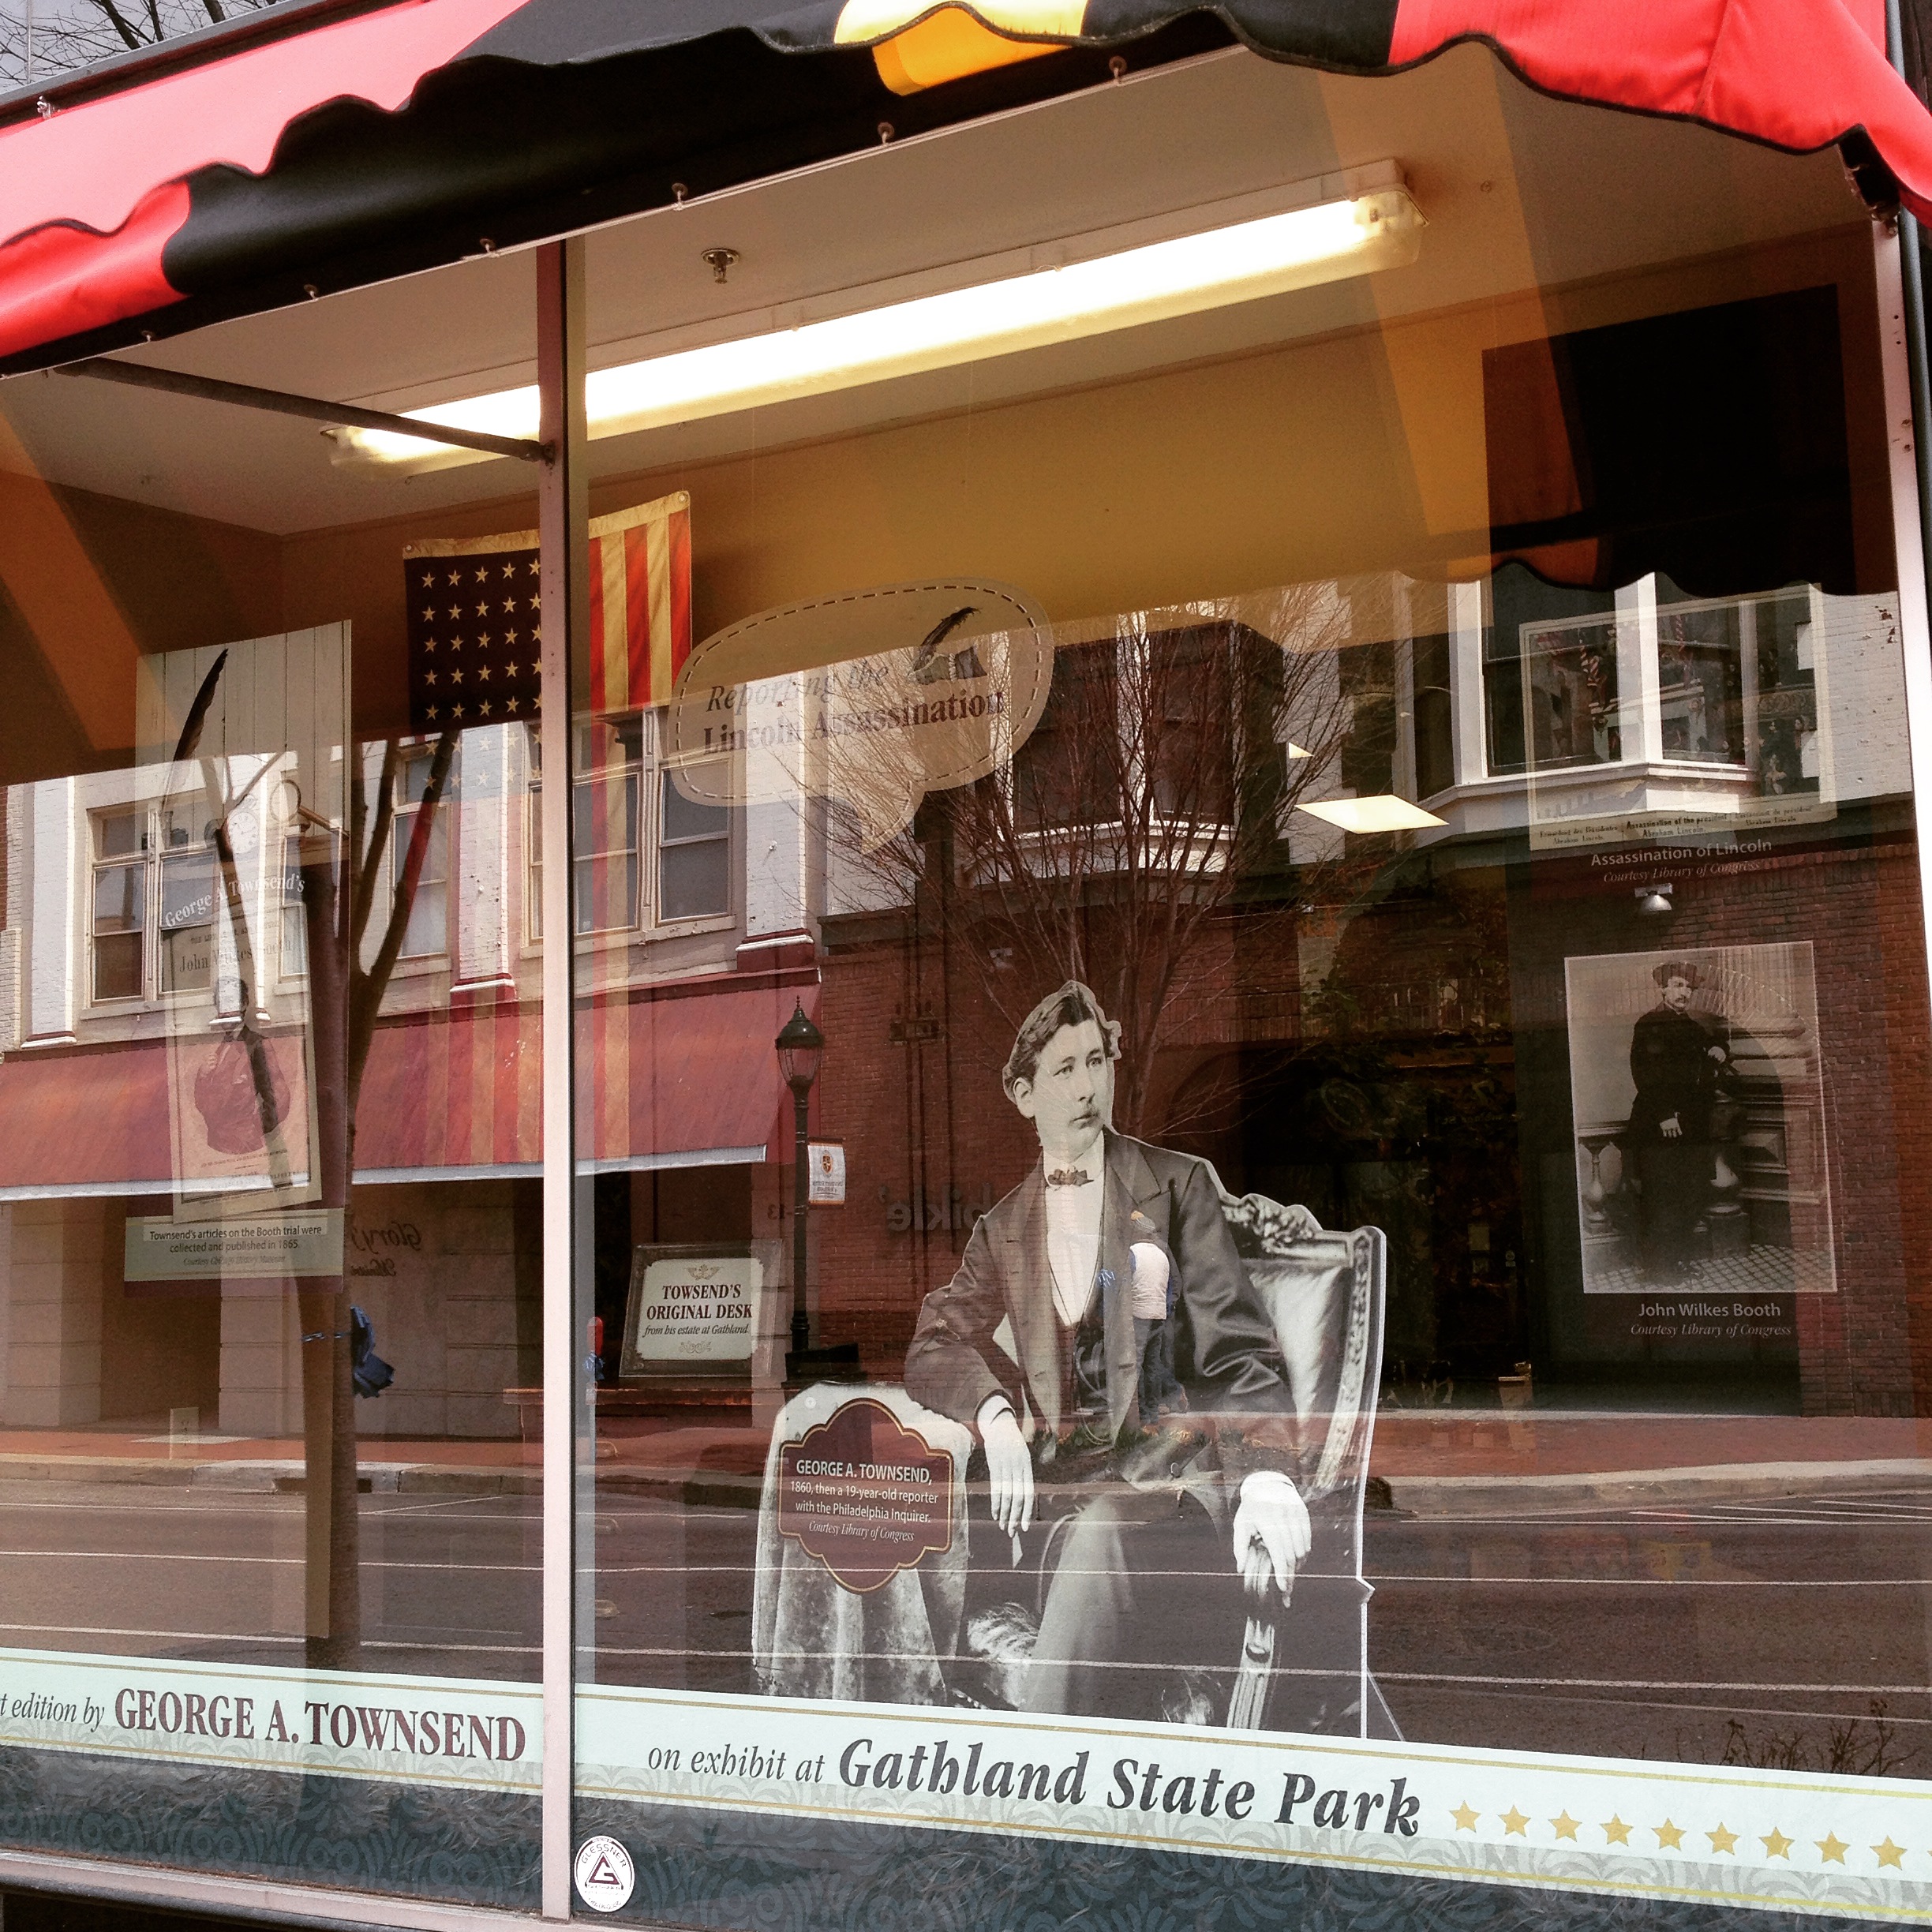 A lifesize cutout of George Alfred Townsend sits in the window of the Visitor Welcome Center in Hagerstown